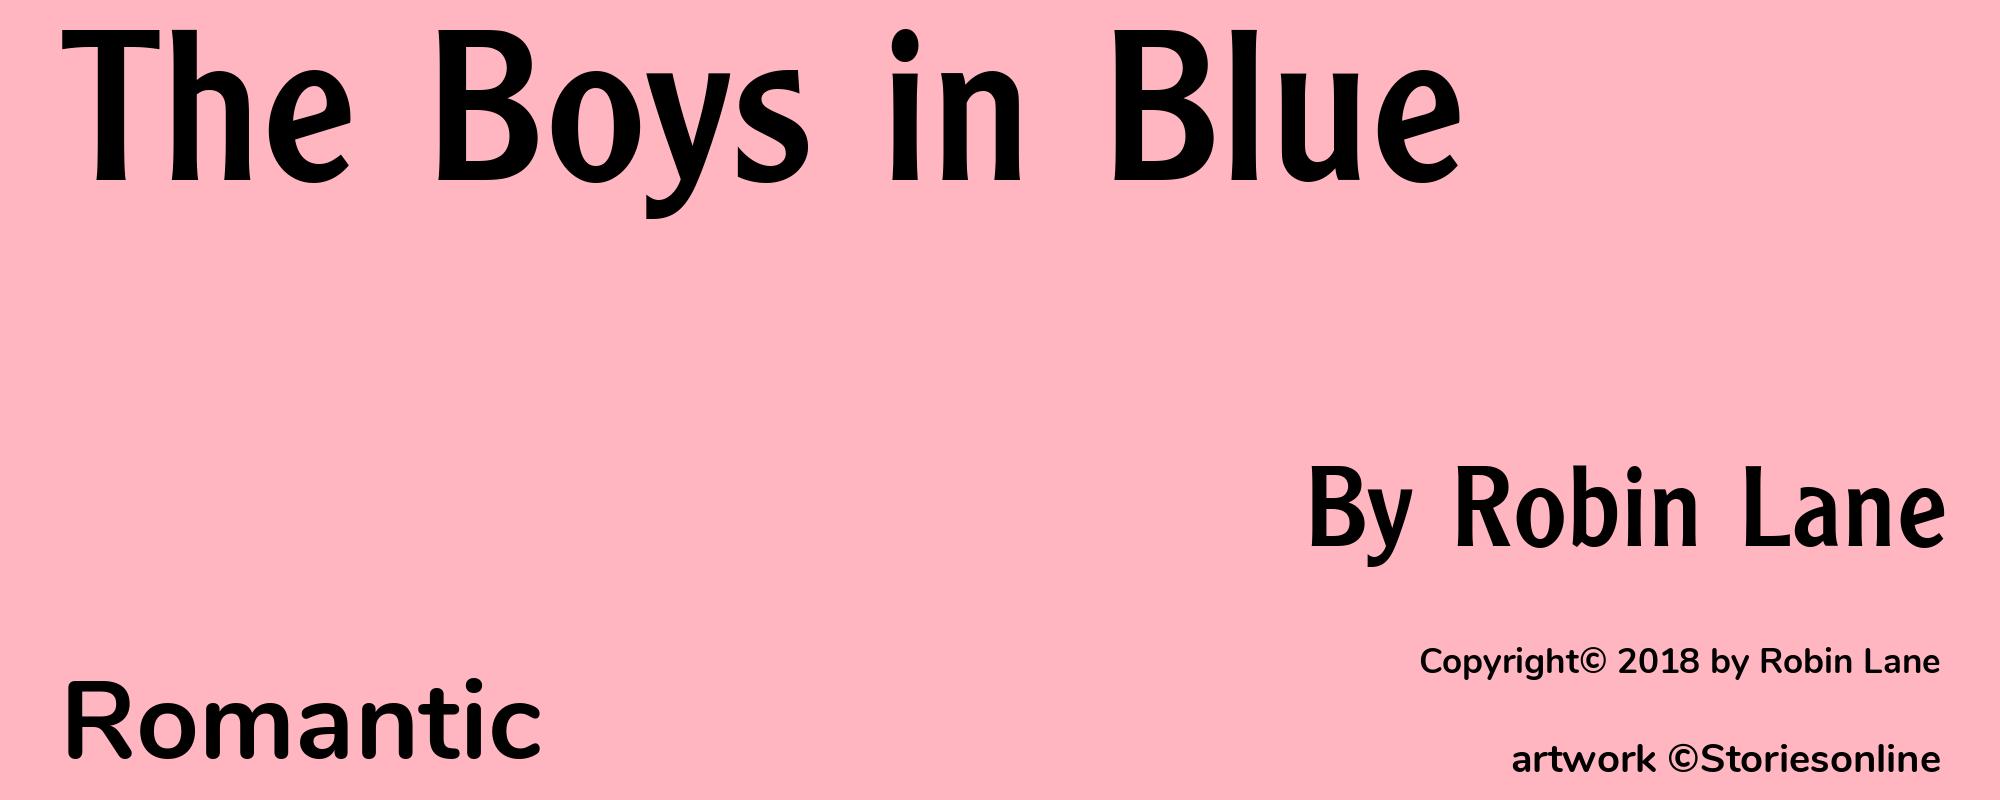 The Boys in Blue - Cover